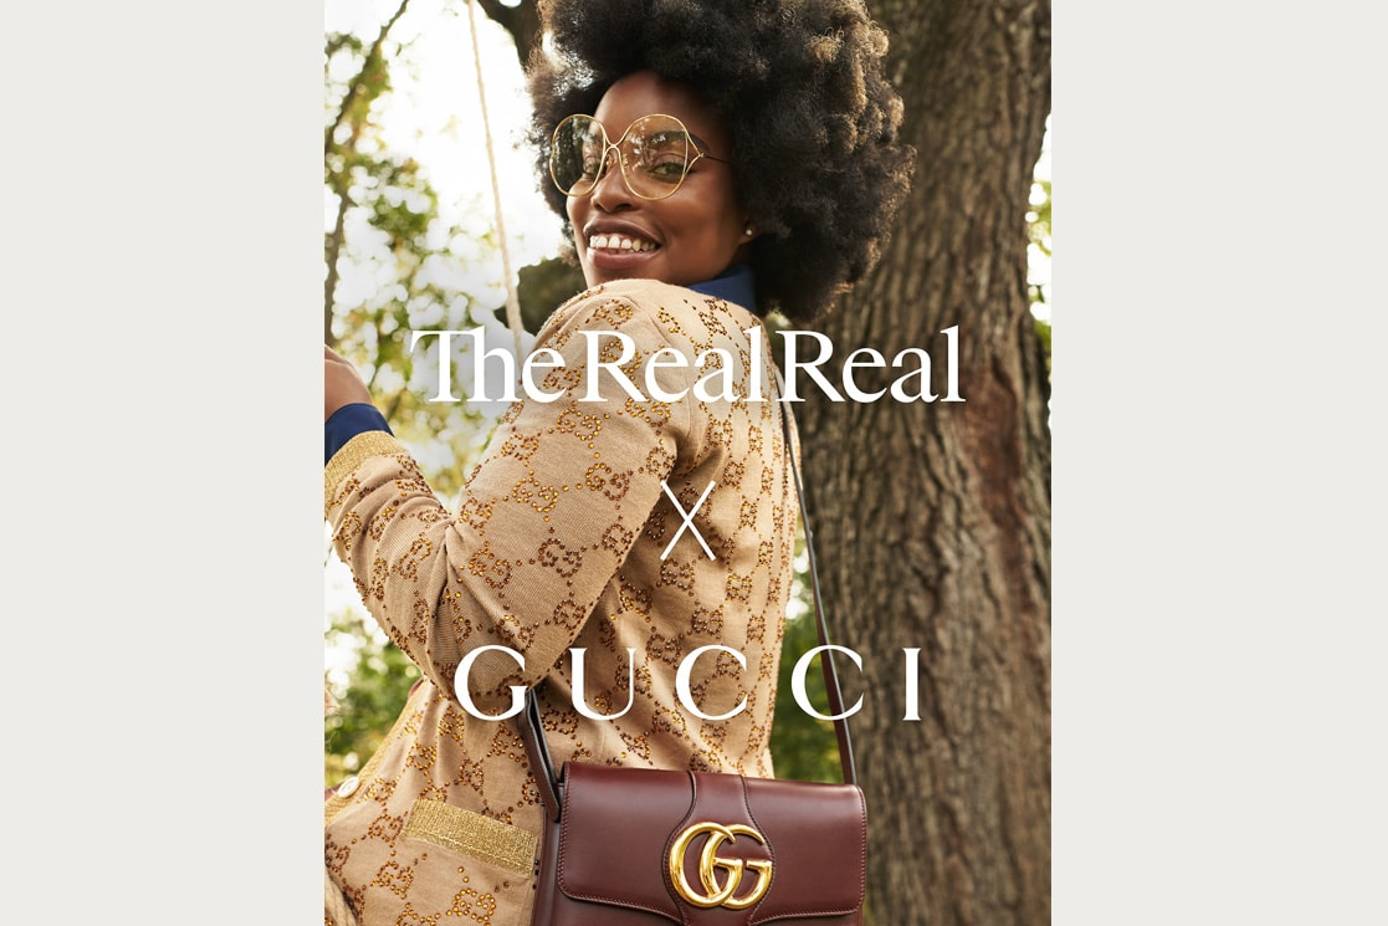 Gucci and the RealReal Announce Partnership As Demand in